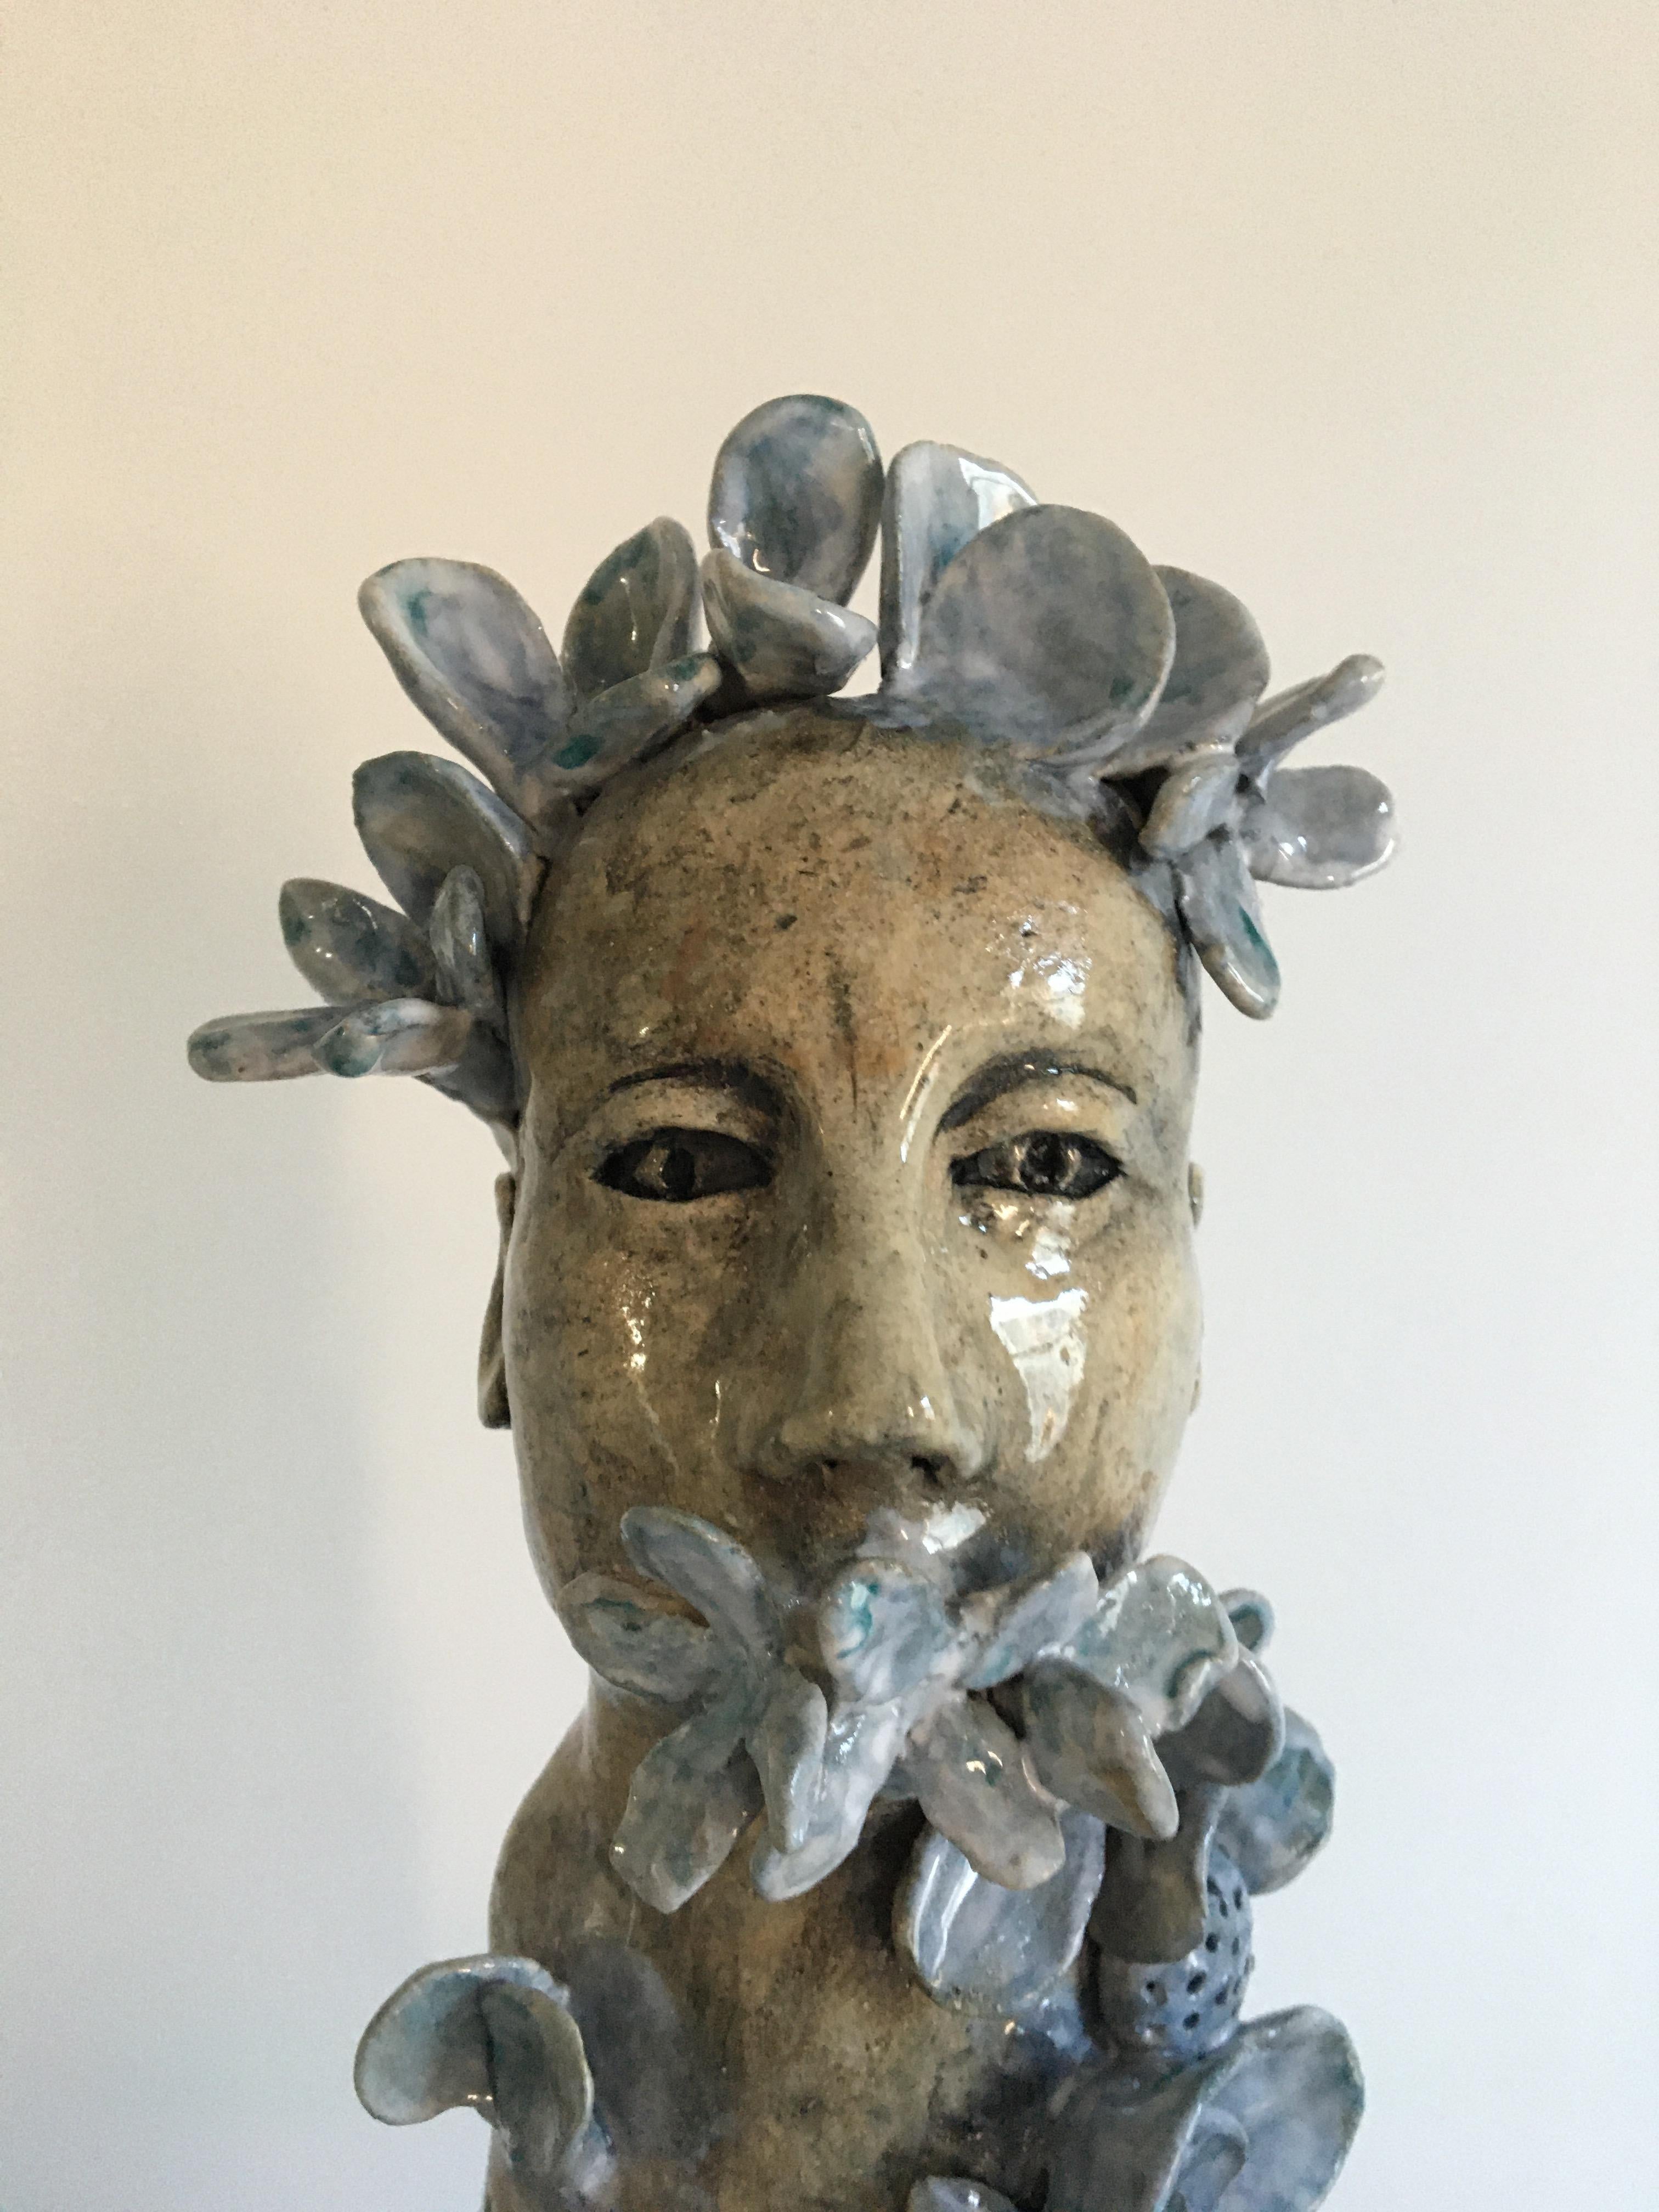 Ceramic figure: 'Let go of expectations and experience the subtle and unbounded' - Brown Figurative Sculpture by Ashley Benton